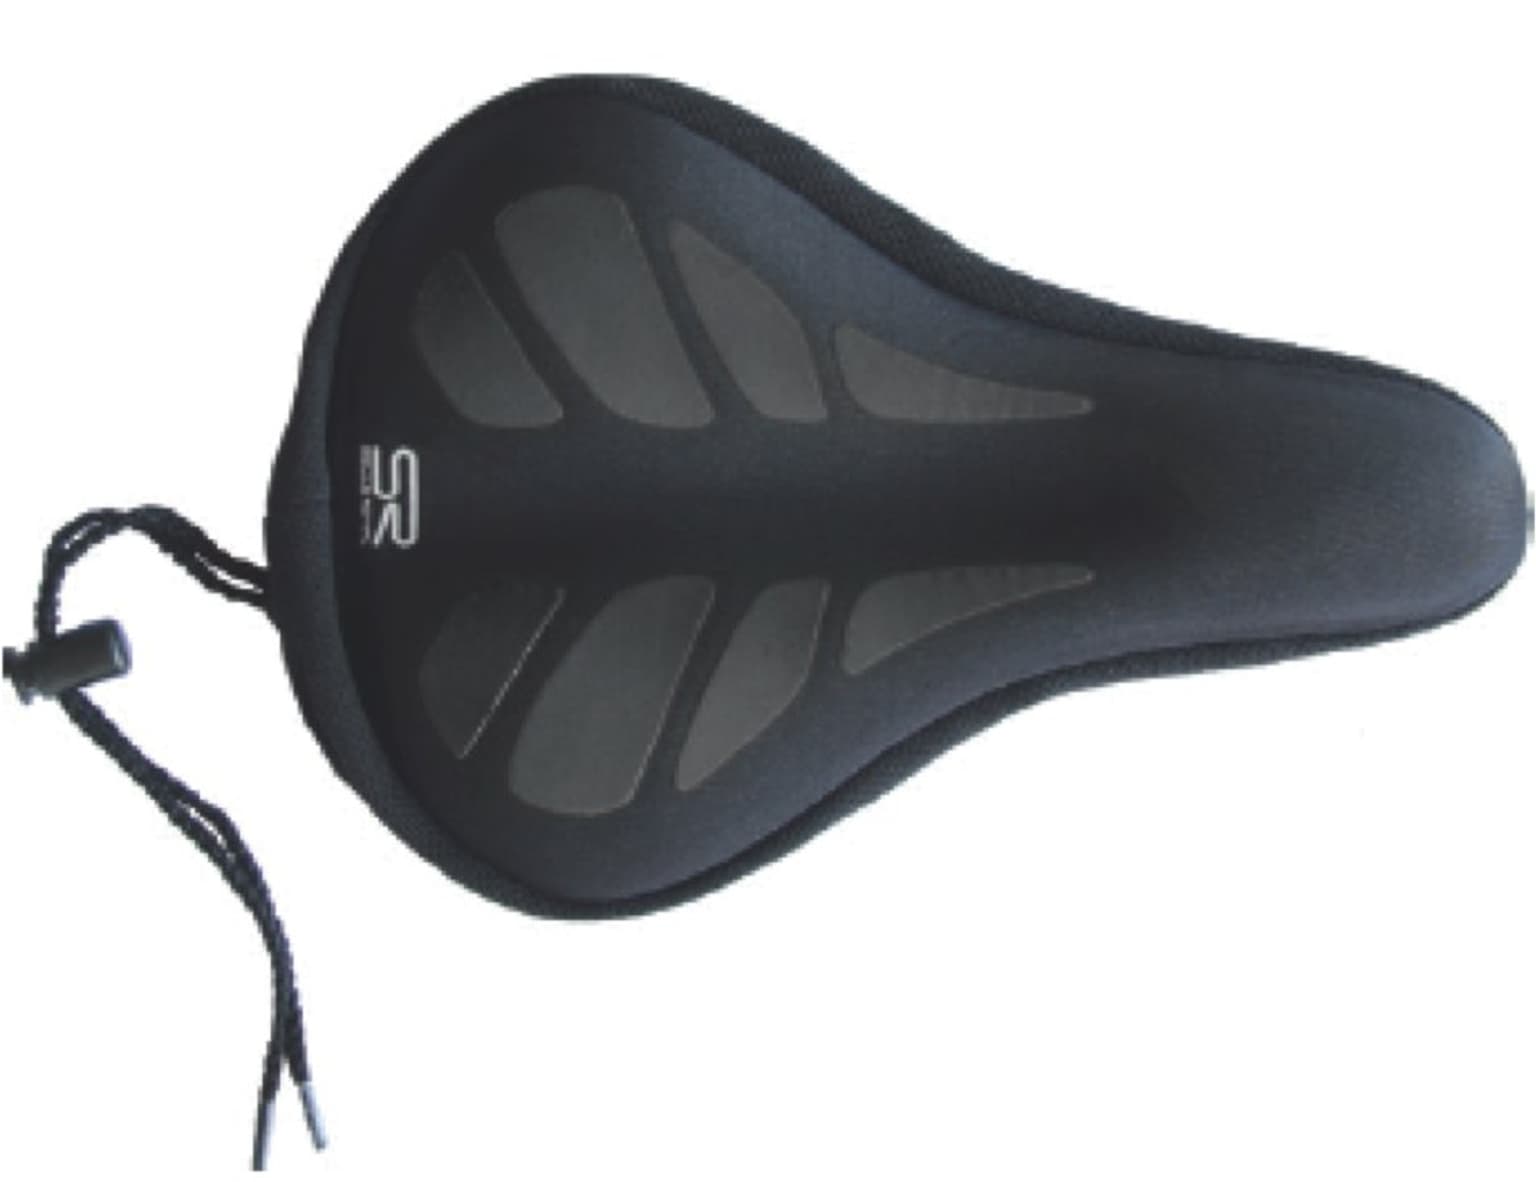 Selle Royal Selle Royal Gel Seat Cover Housse pour selle 1